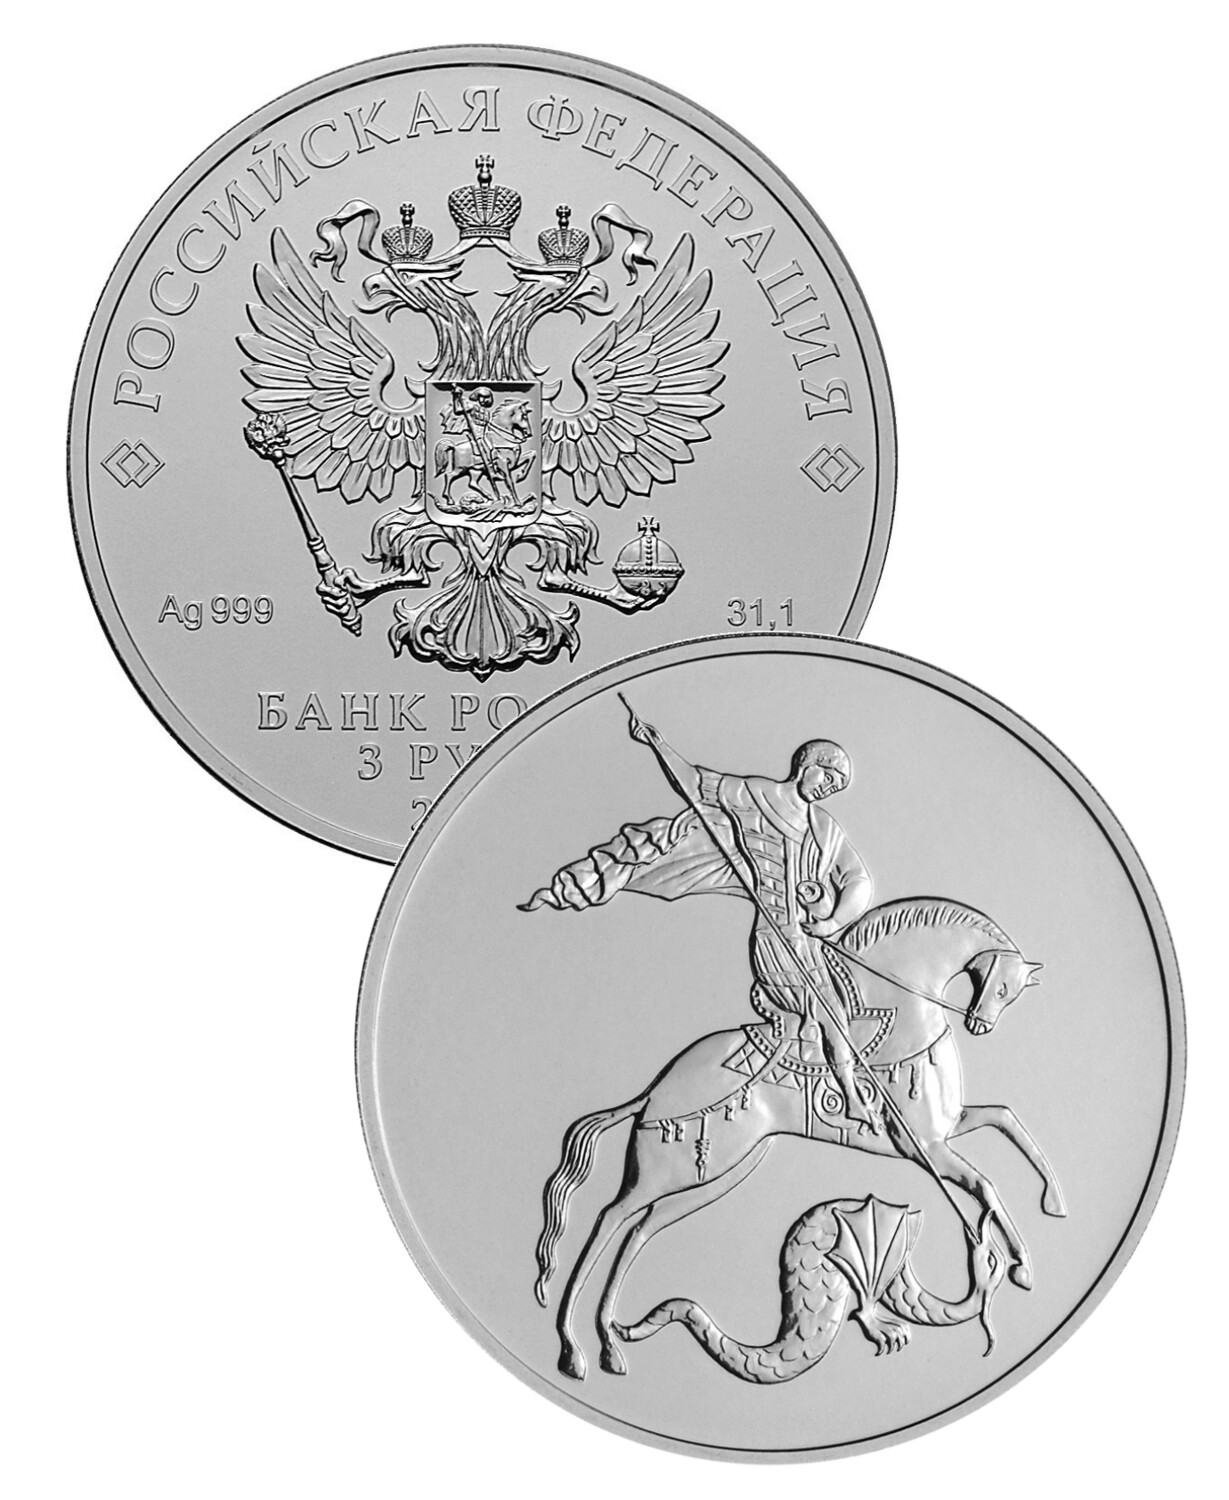 Russia. 2019. 3 Rubles. SPMD. George the Victorious. Silver 999. 1.0 Oz ASW 31.5g. UNC Mintage: 100,000